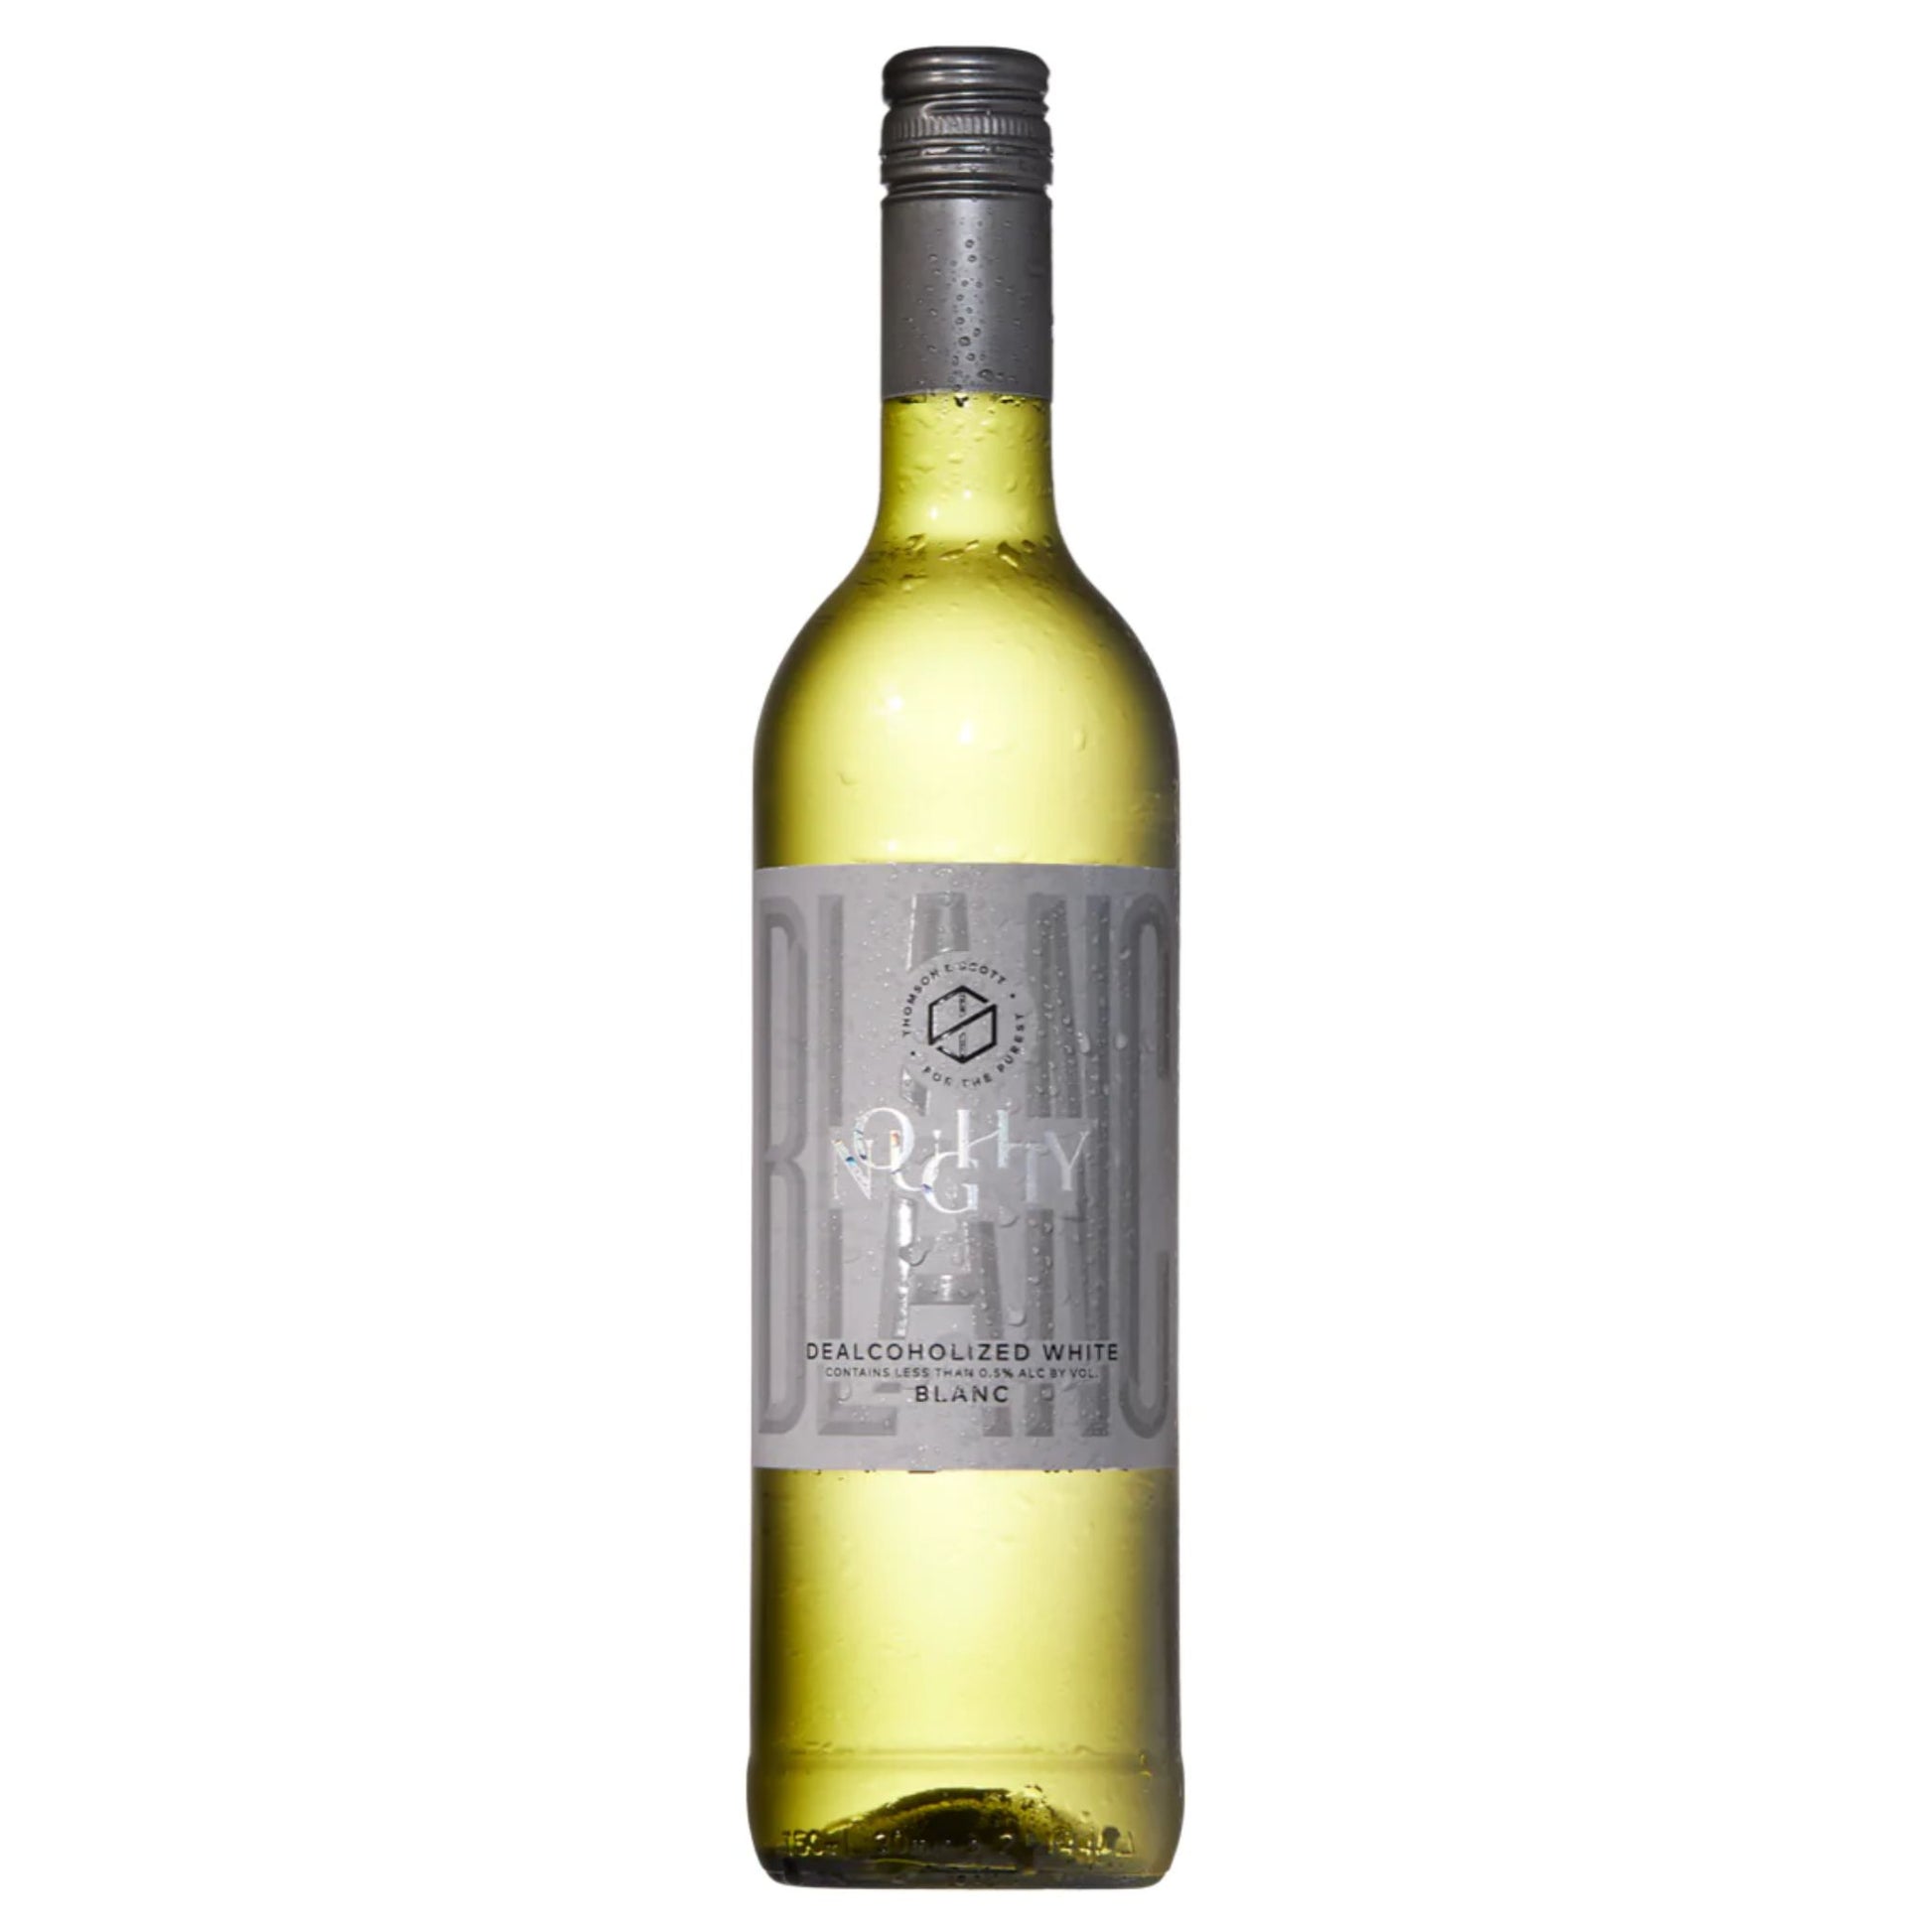 Noughty Blanc Dealcoholized White is available at Knyota Non-Alcoholic Drinks.